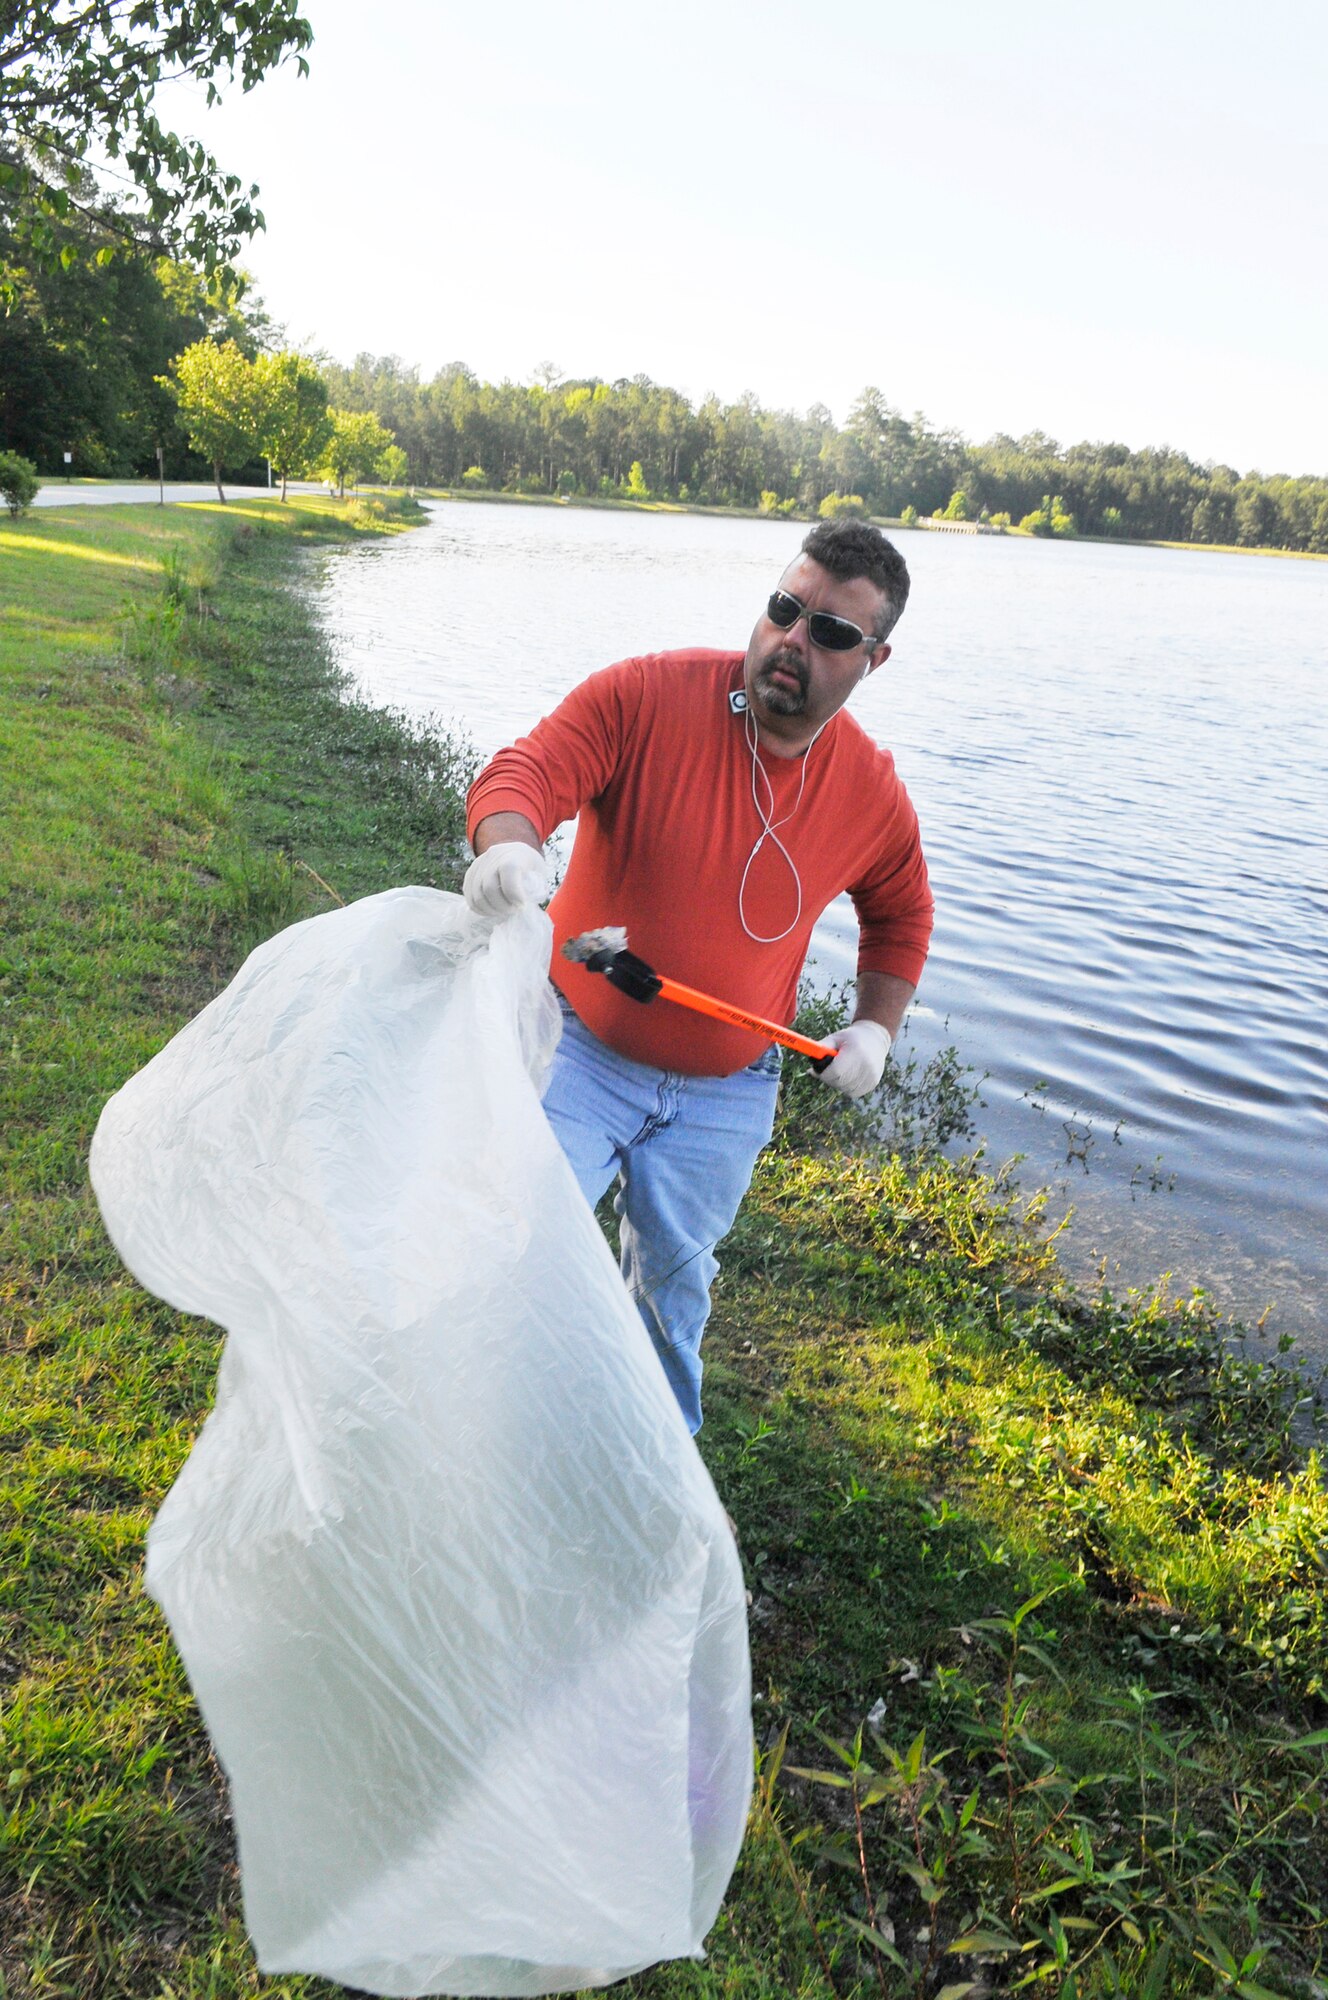 Griff Cox, 78th Civil Engineer Group, picks up trash and debris around Scout Lake Wednesday. The clean-up was part of the Robins Air Force Base Earth Day Celebration events. (U. S. Air Force photo by Sue Sapp)